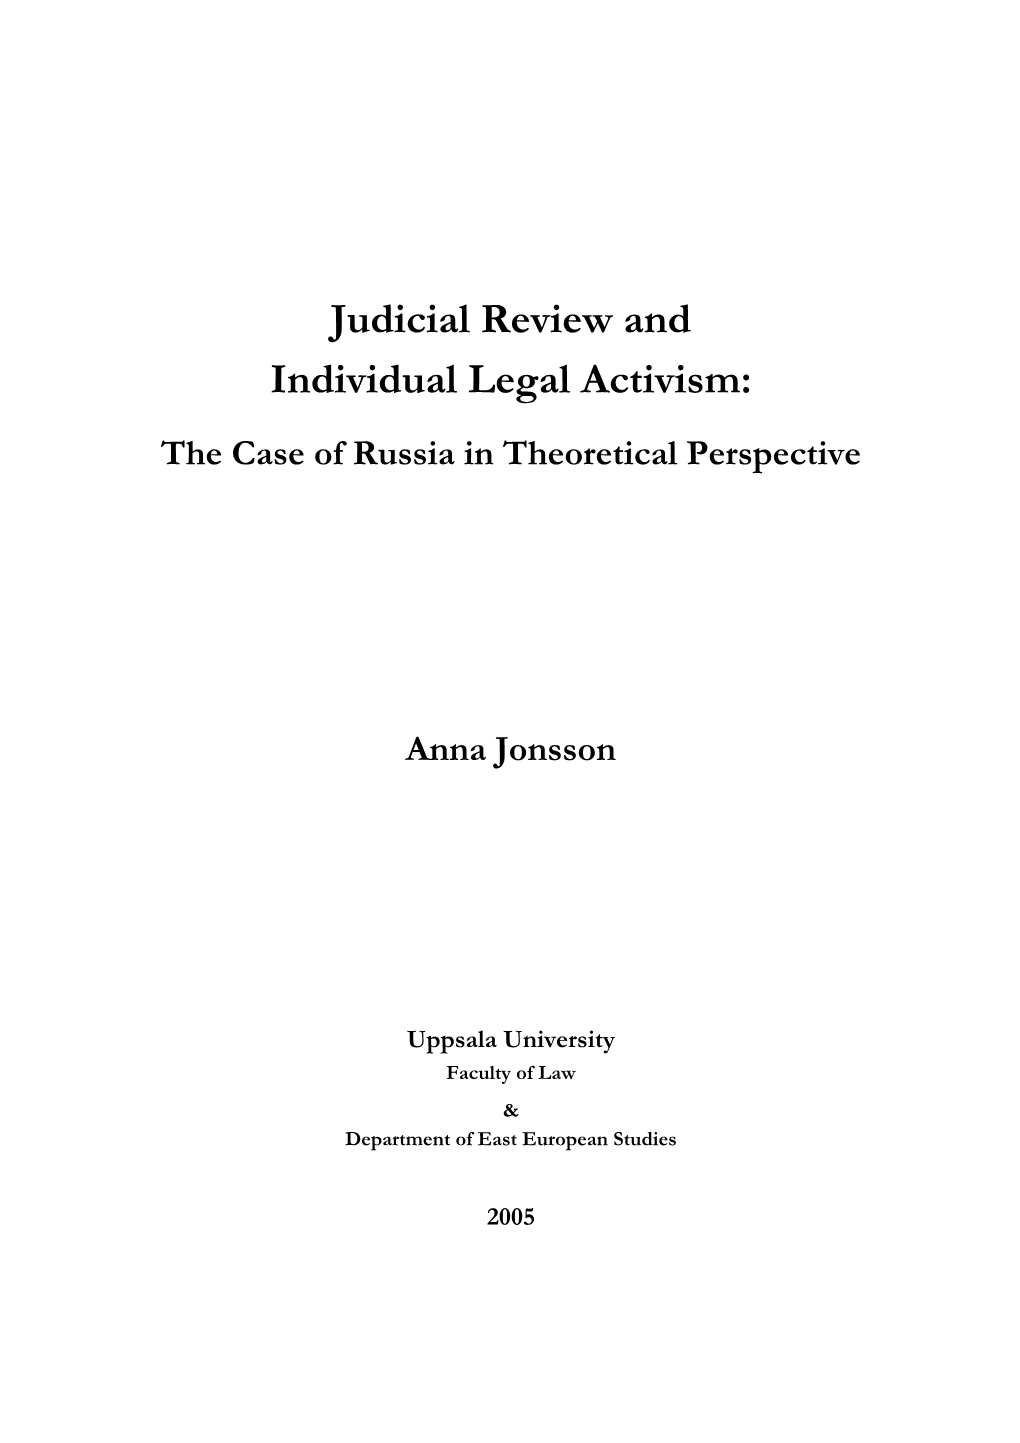 Judicial Review and Individual Legal Activism: the Case of Russia in Theoretical Perspective